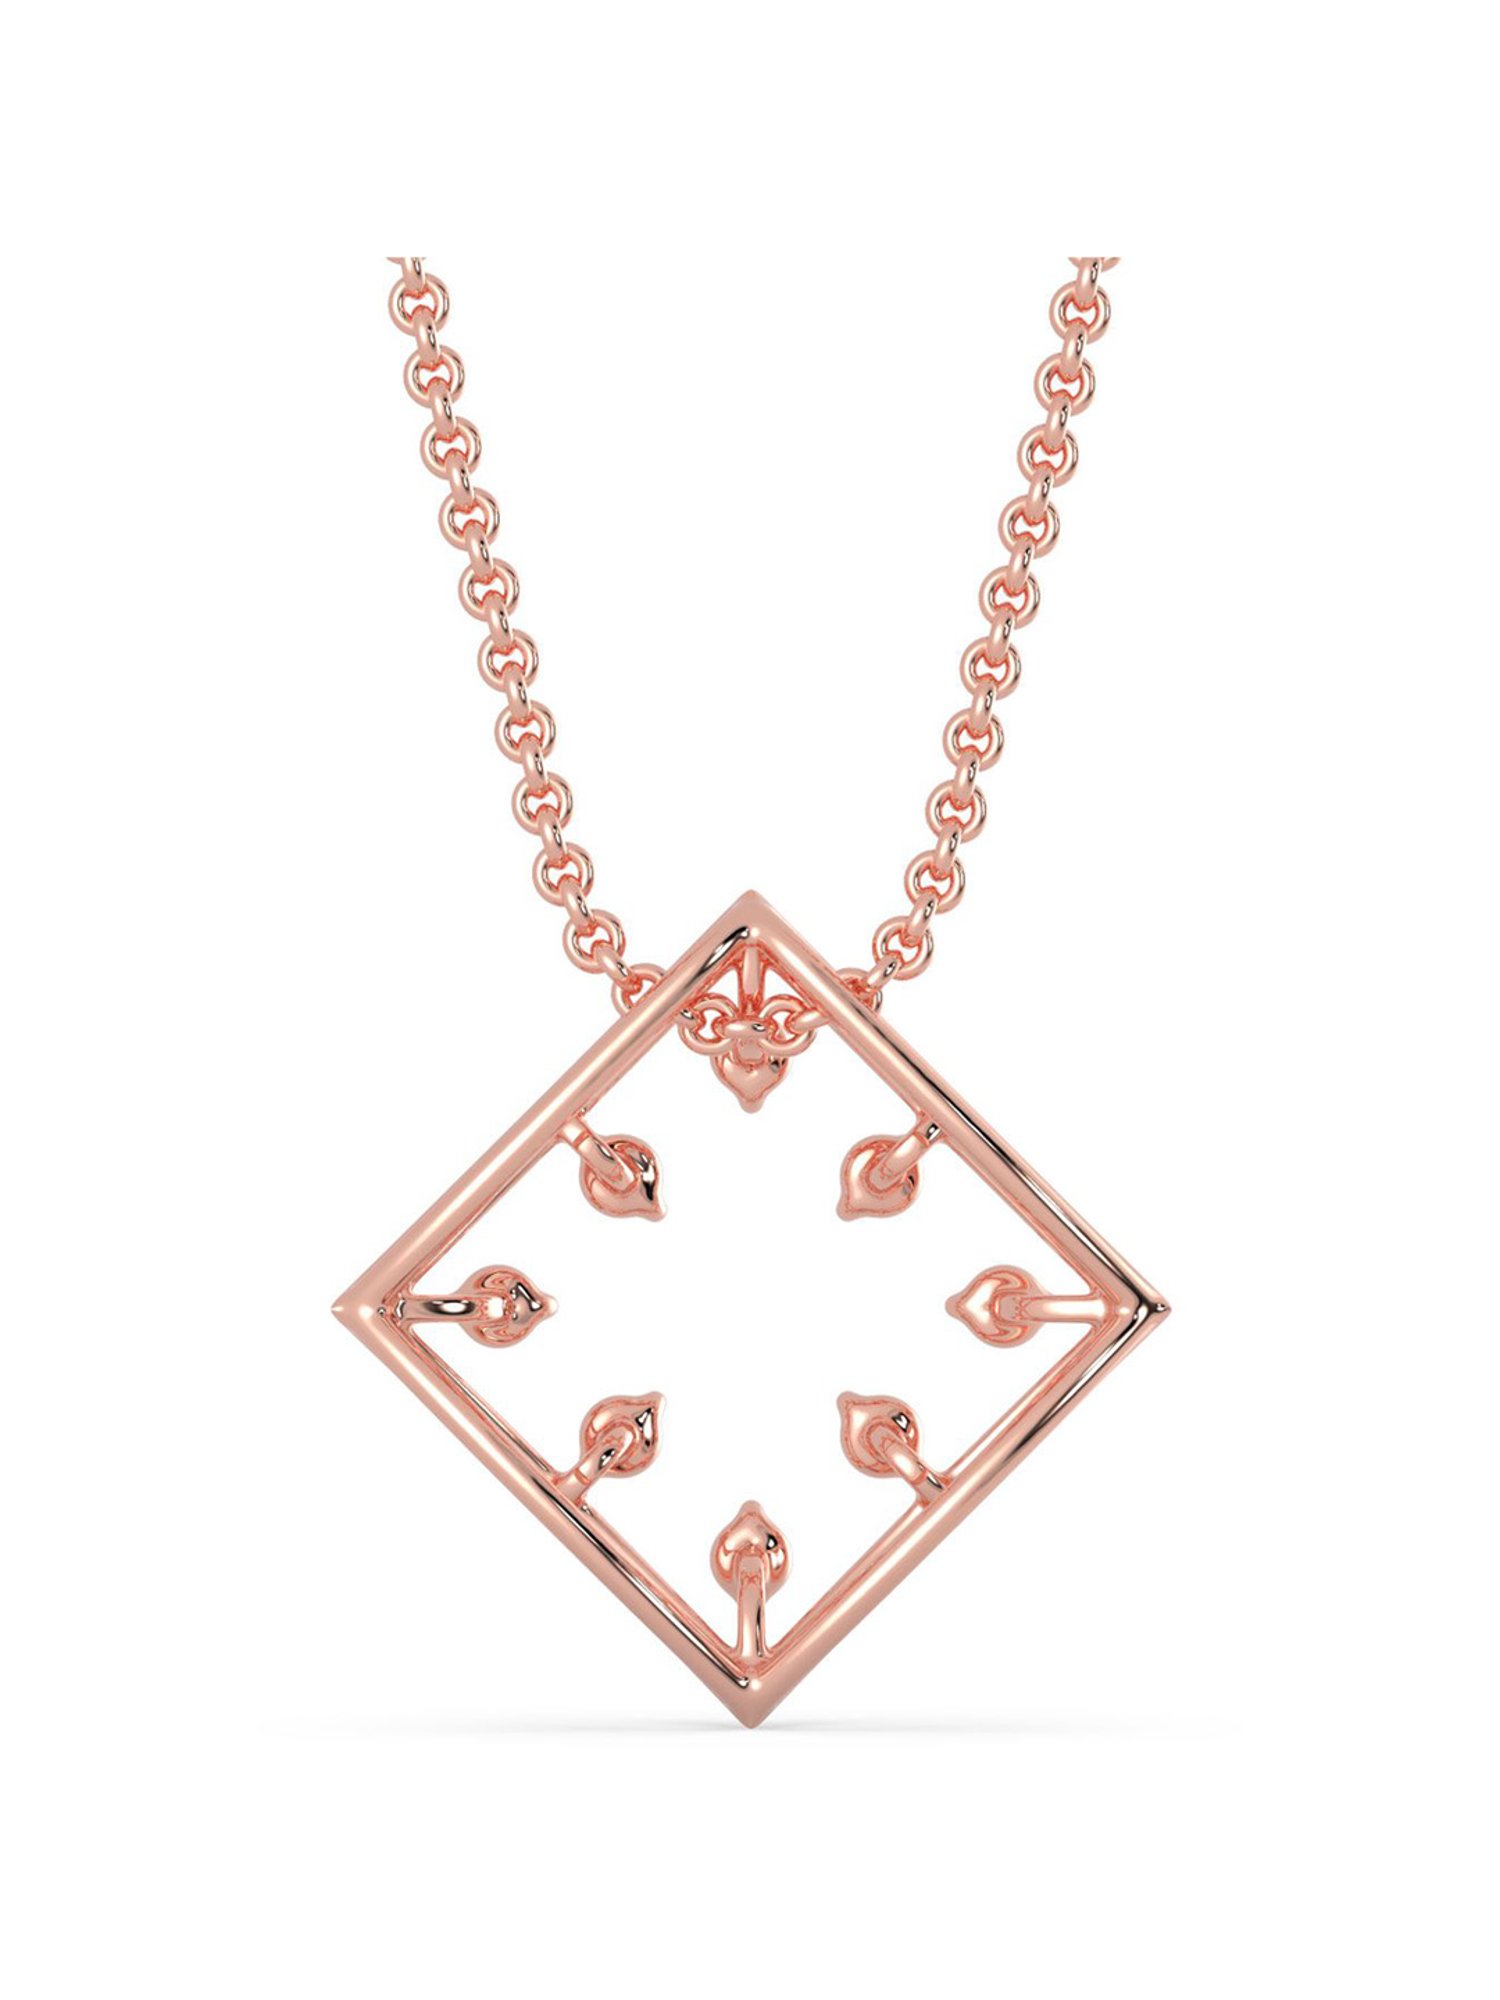 Star Blossom Necklace, Pink Gold And Diamonds